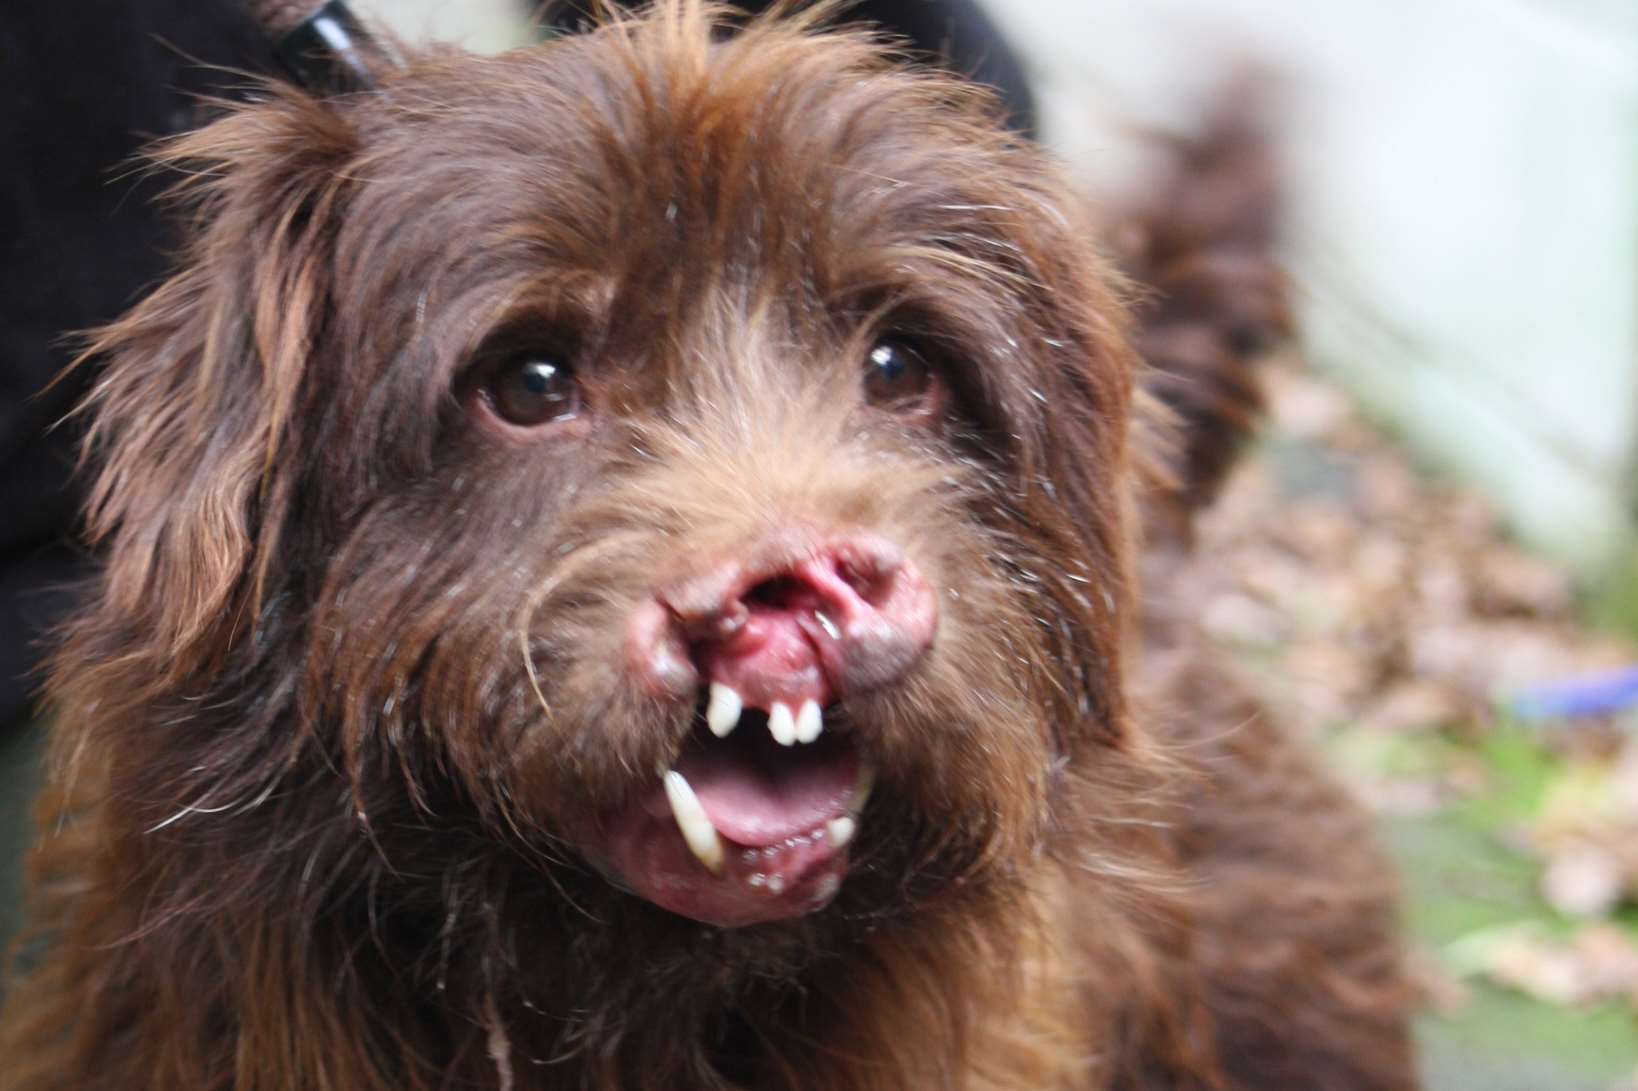 A terrier called Major suffered horrific facial injuries